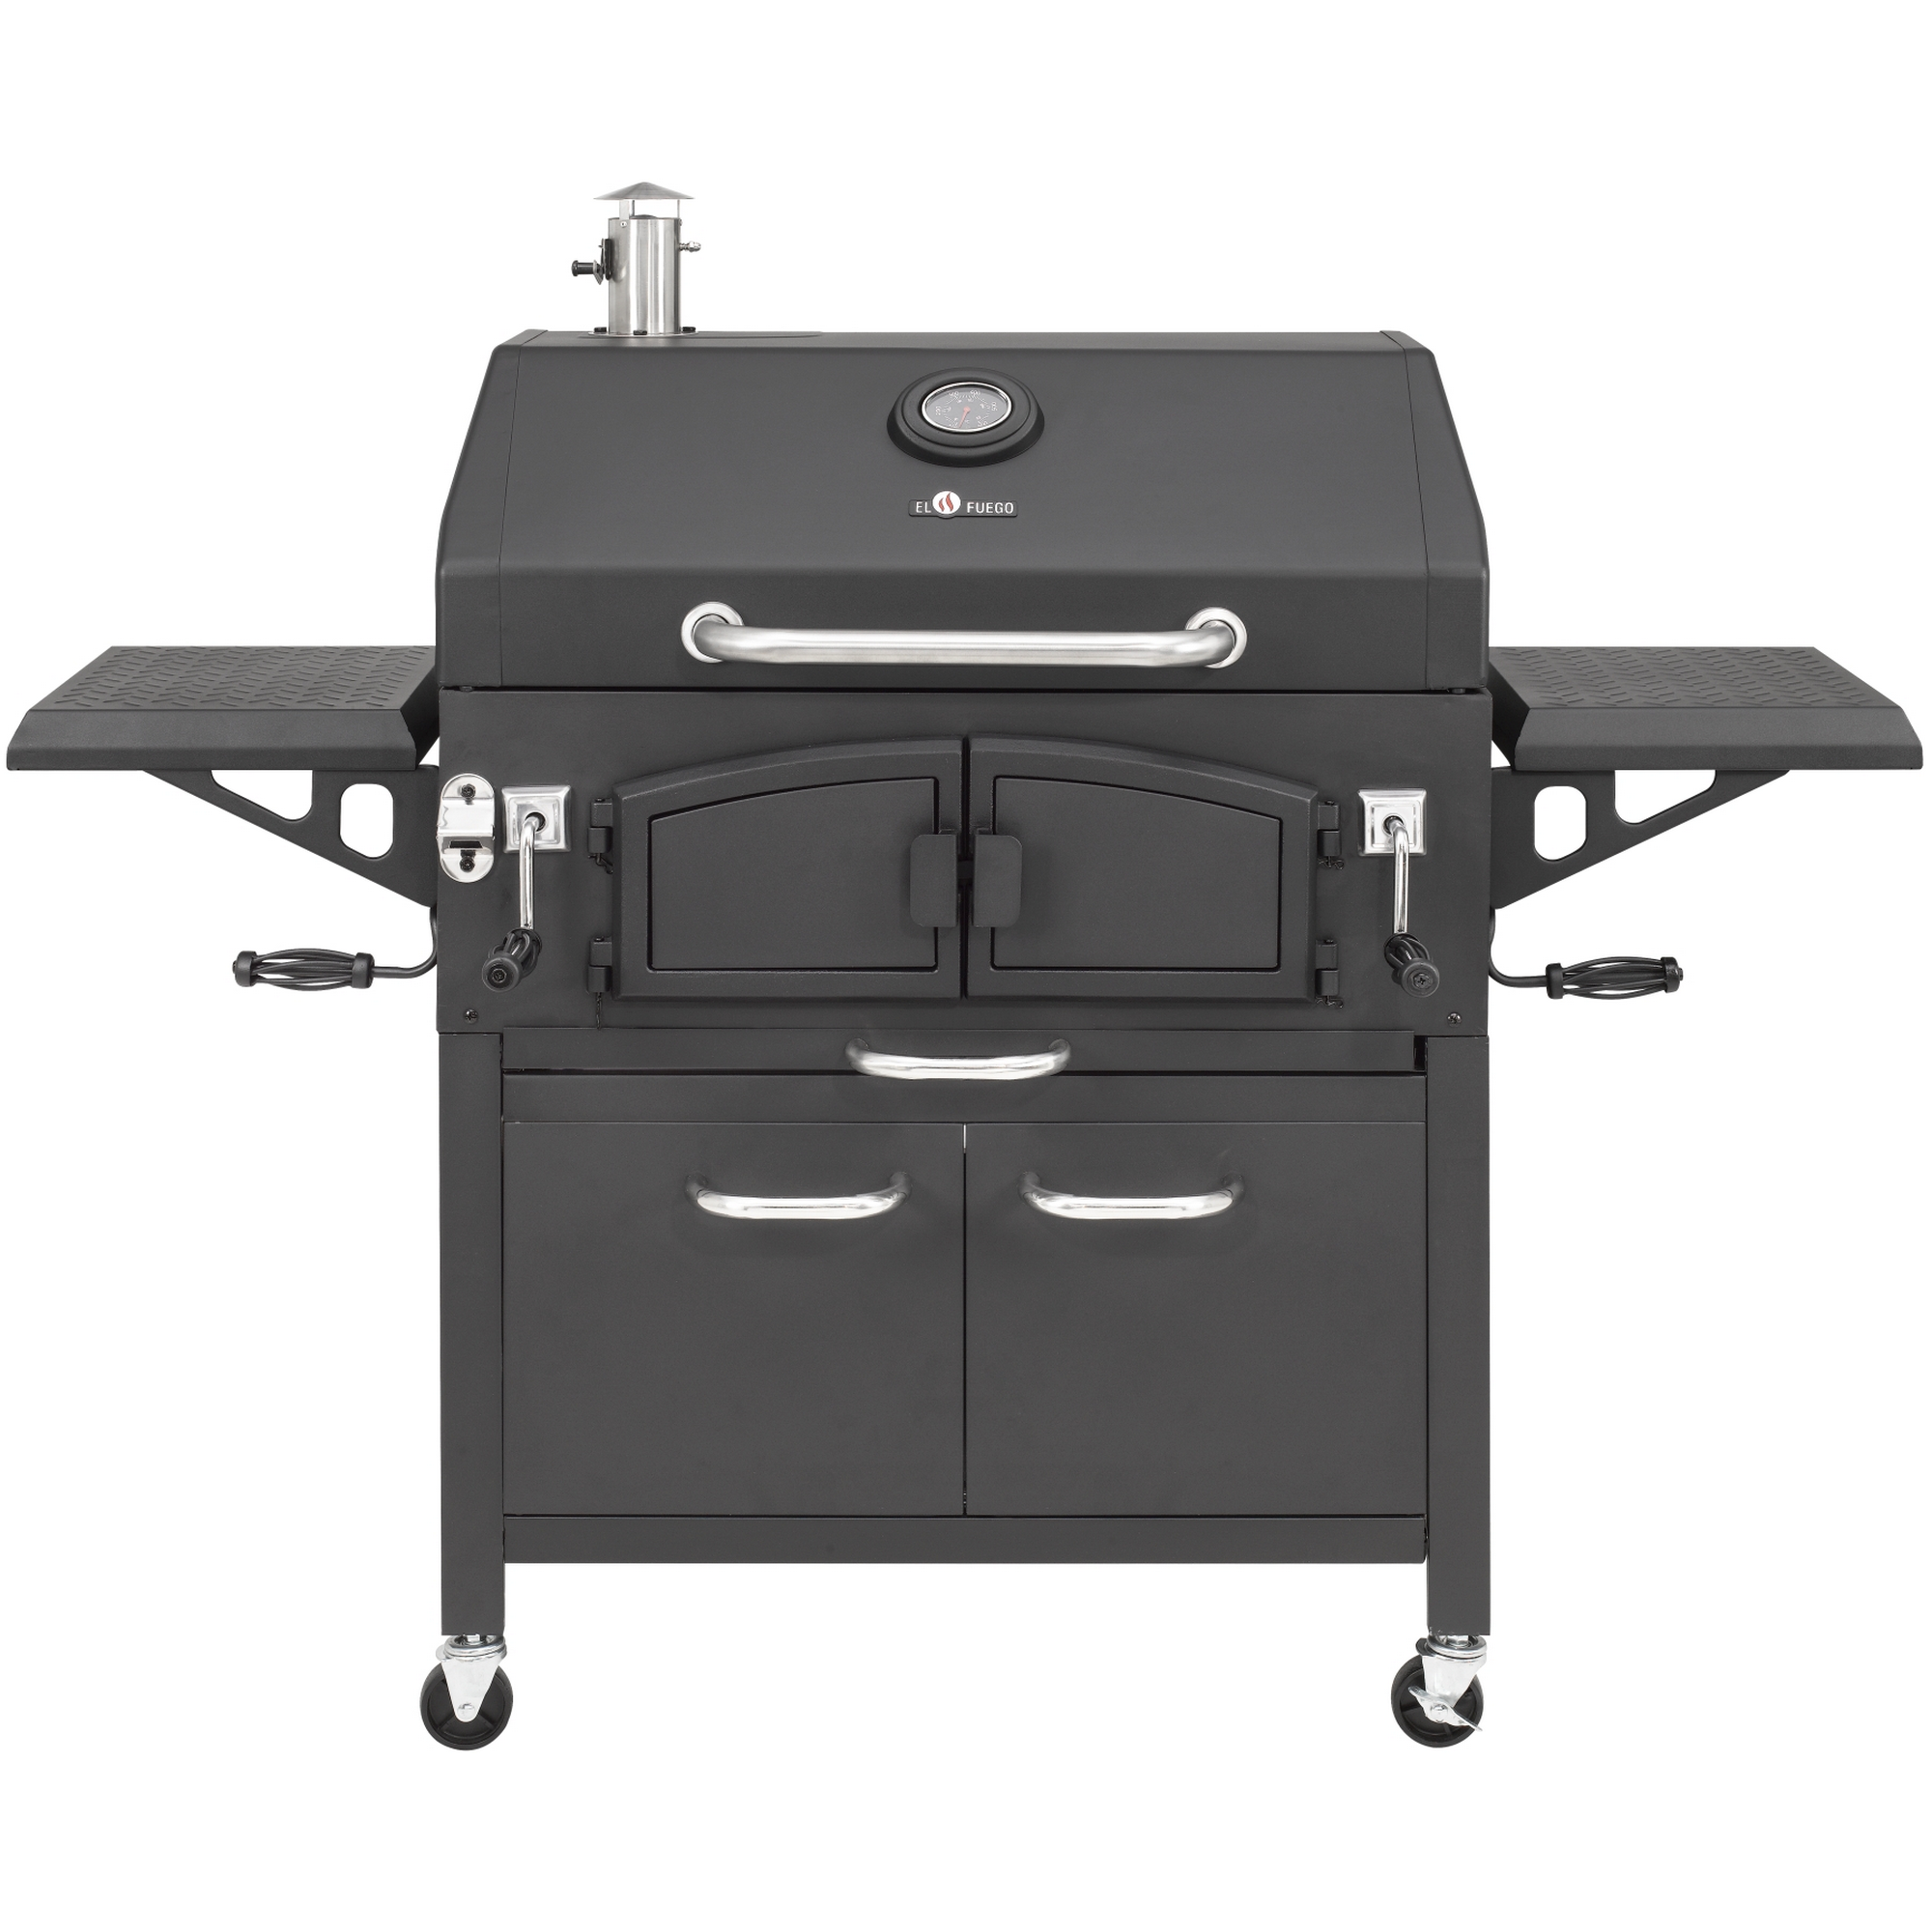 Holzkohlegrill 'Grand Ontario' schwarz 154 x 131 x 68,5 cm + product picture